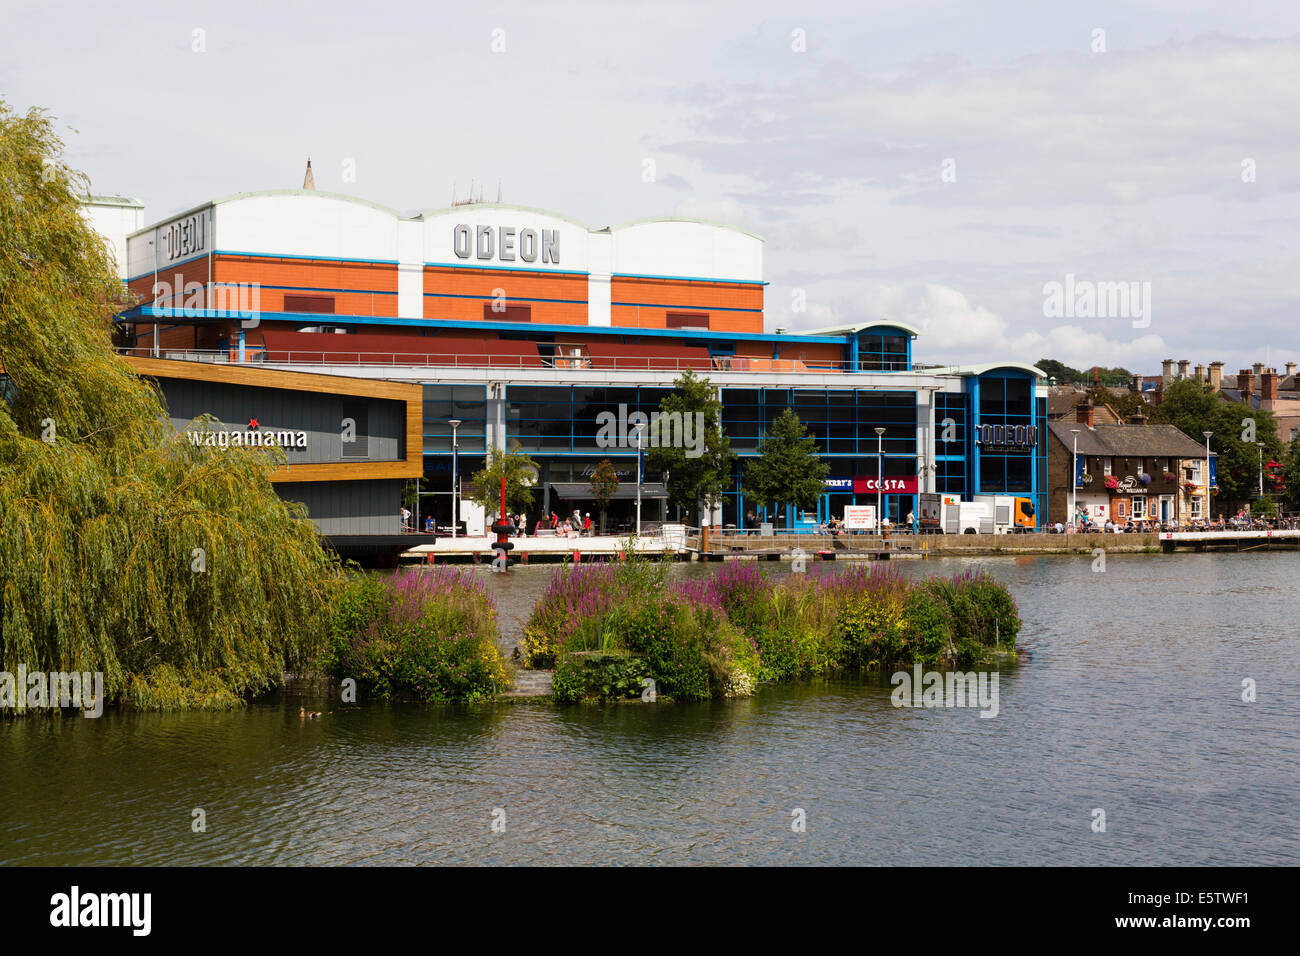 Looking across Brayford Pool towards the Odeon cinema and bars and cafes on the Brayford Quay.Lincoln Stock Photo